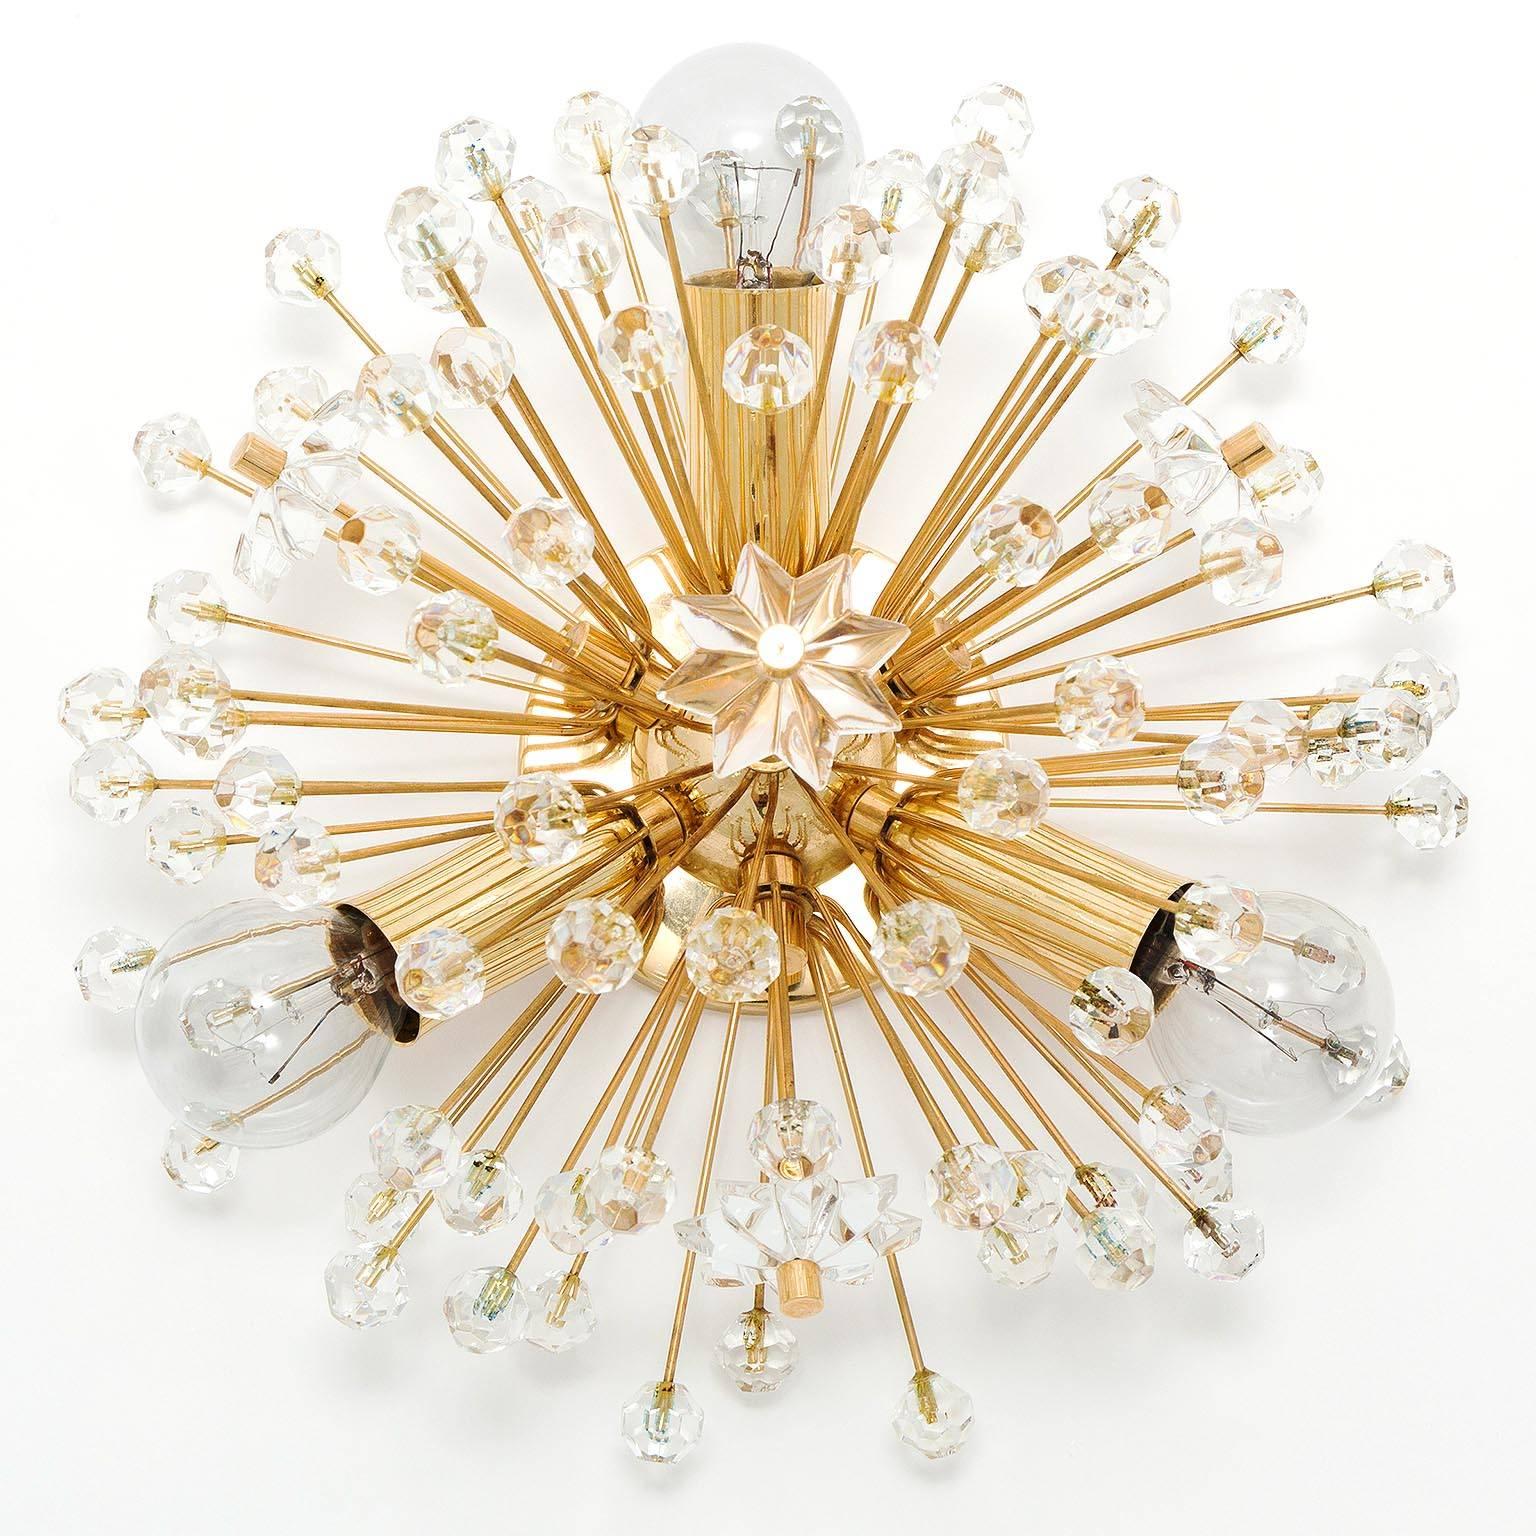 One of three beautiful Viennese snowflake / blowball / sputnik wall lights designed by Emil Stejnar, Austria, manufactured in midcentury, circa 1970 (late 1960s or early 1970s).
High-quality light fixtures made of a 24-carat gold-plated brass frame